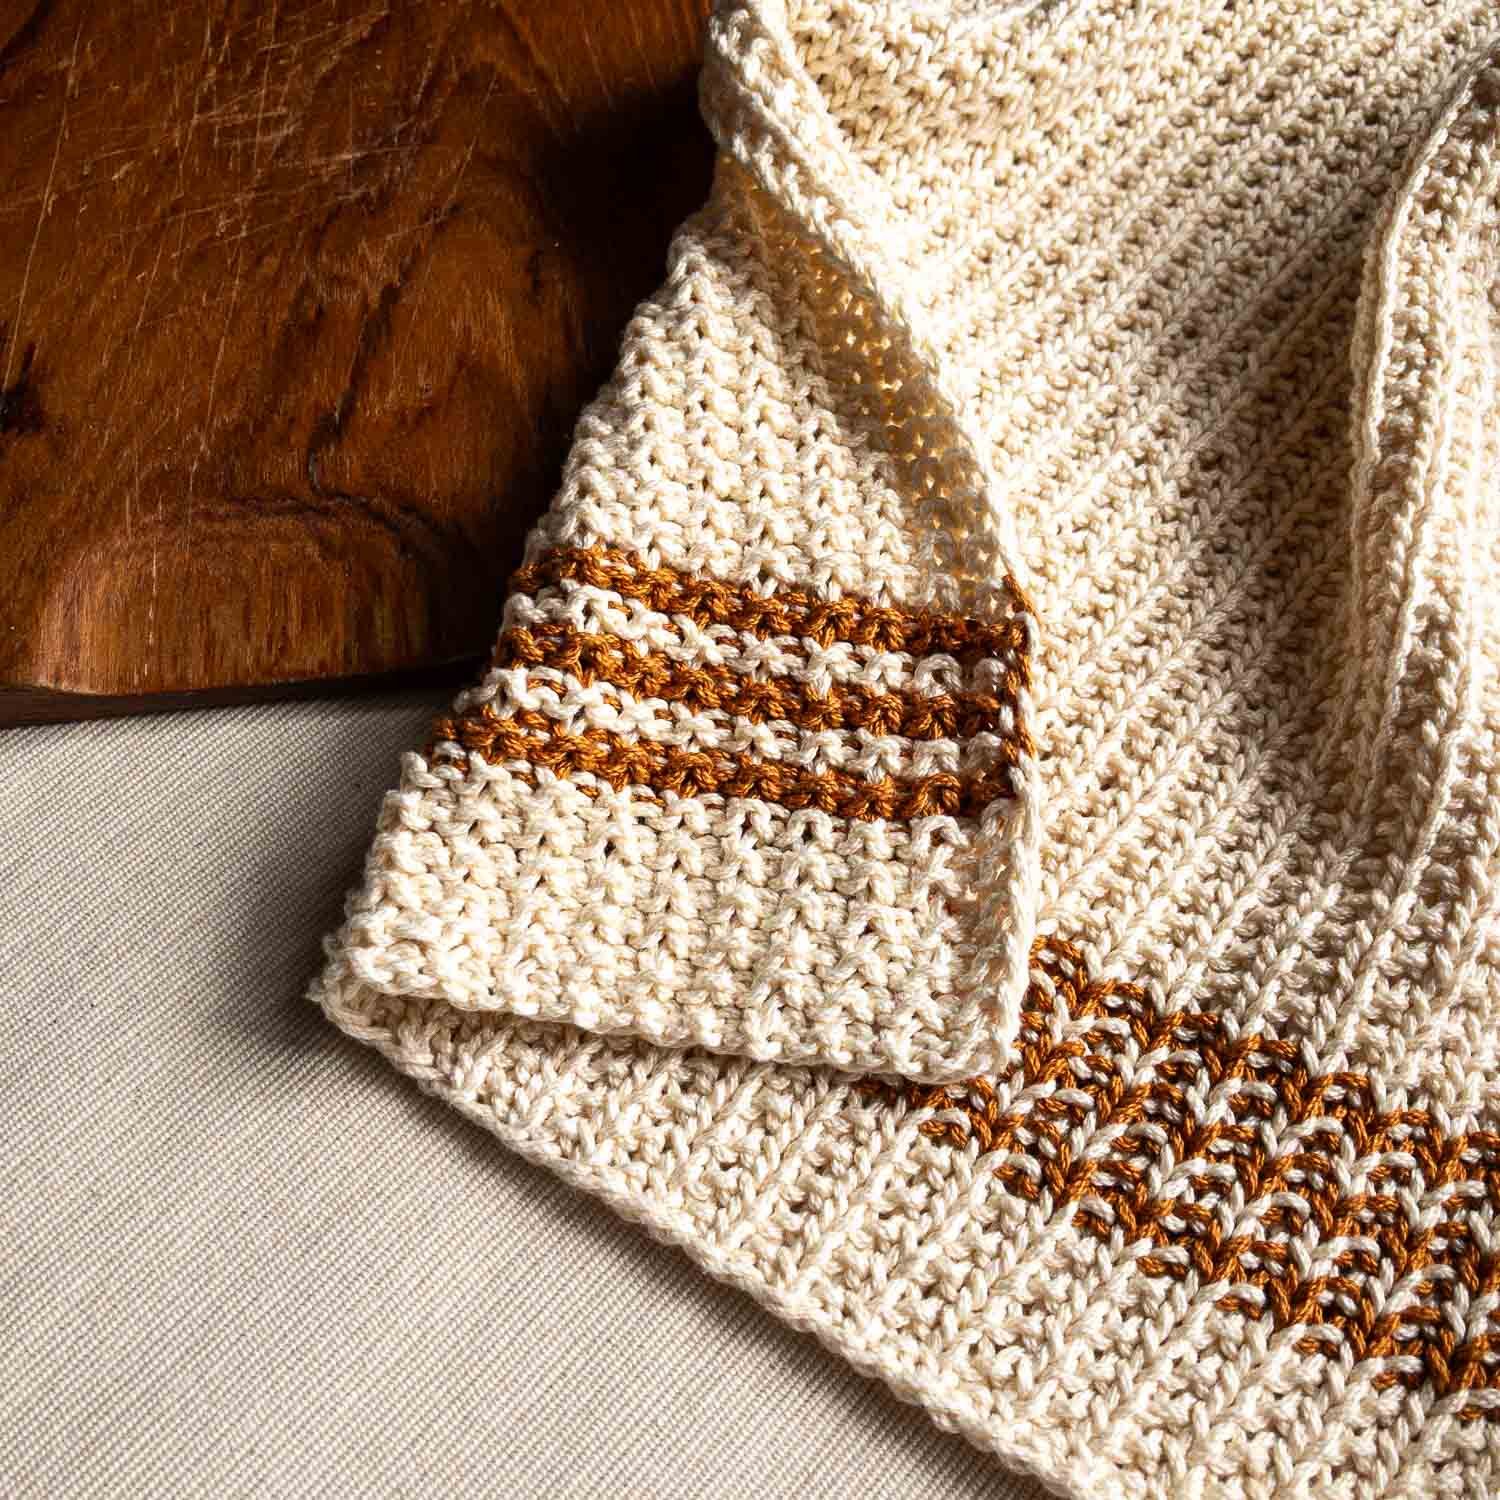 How to Knit a Farmhouse Kitchen Dishcloth - Making it in the Mountains